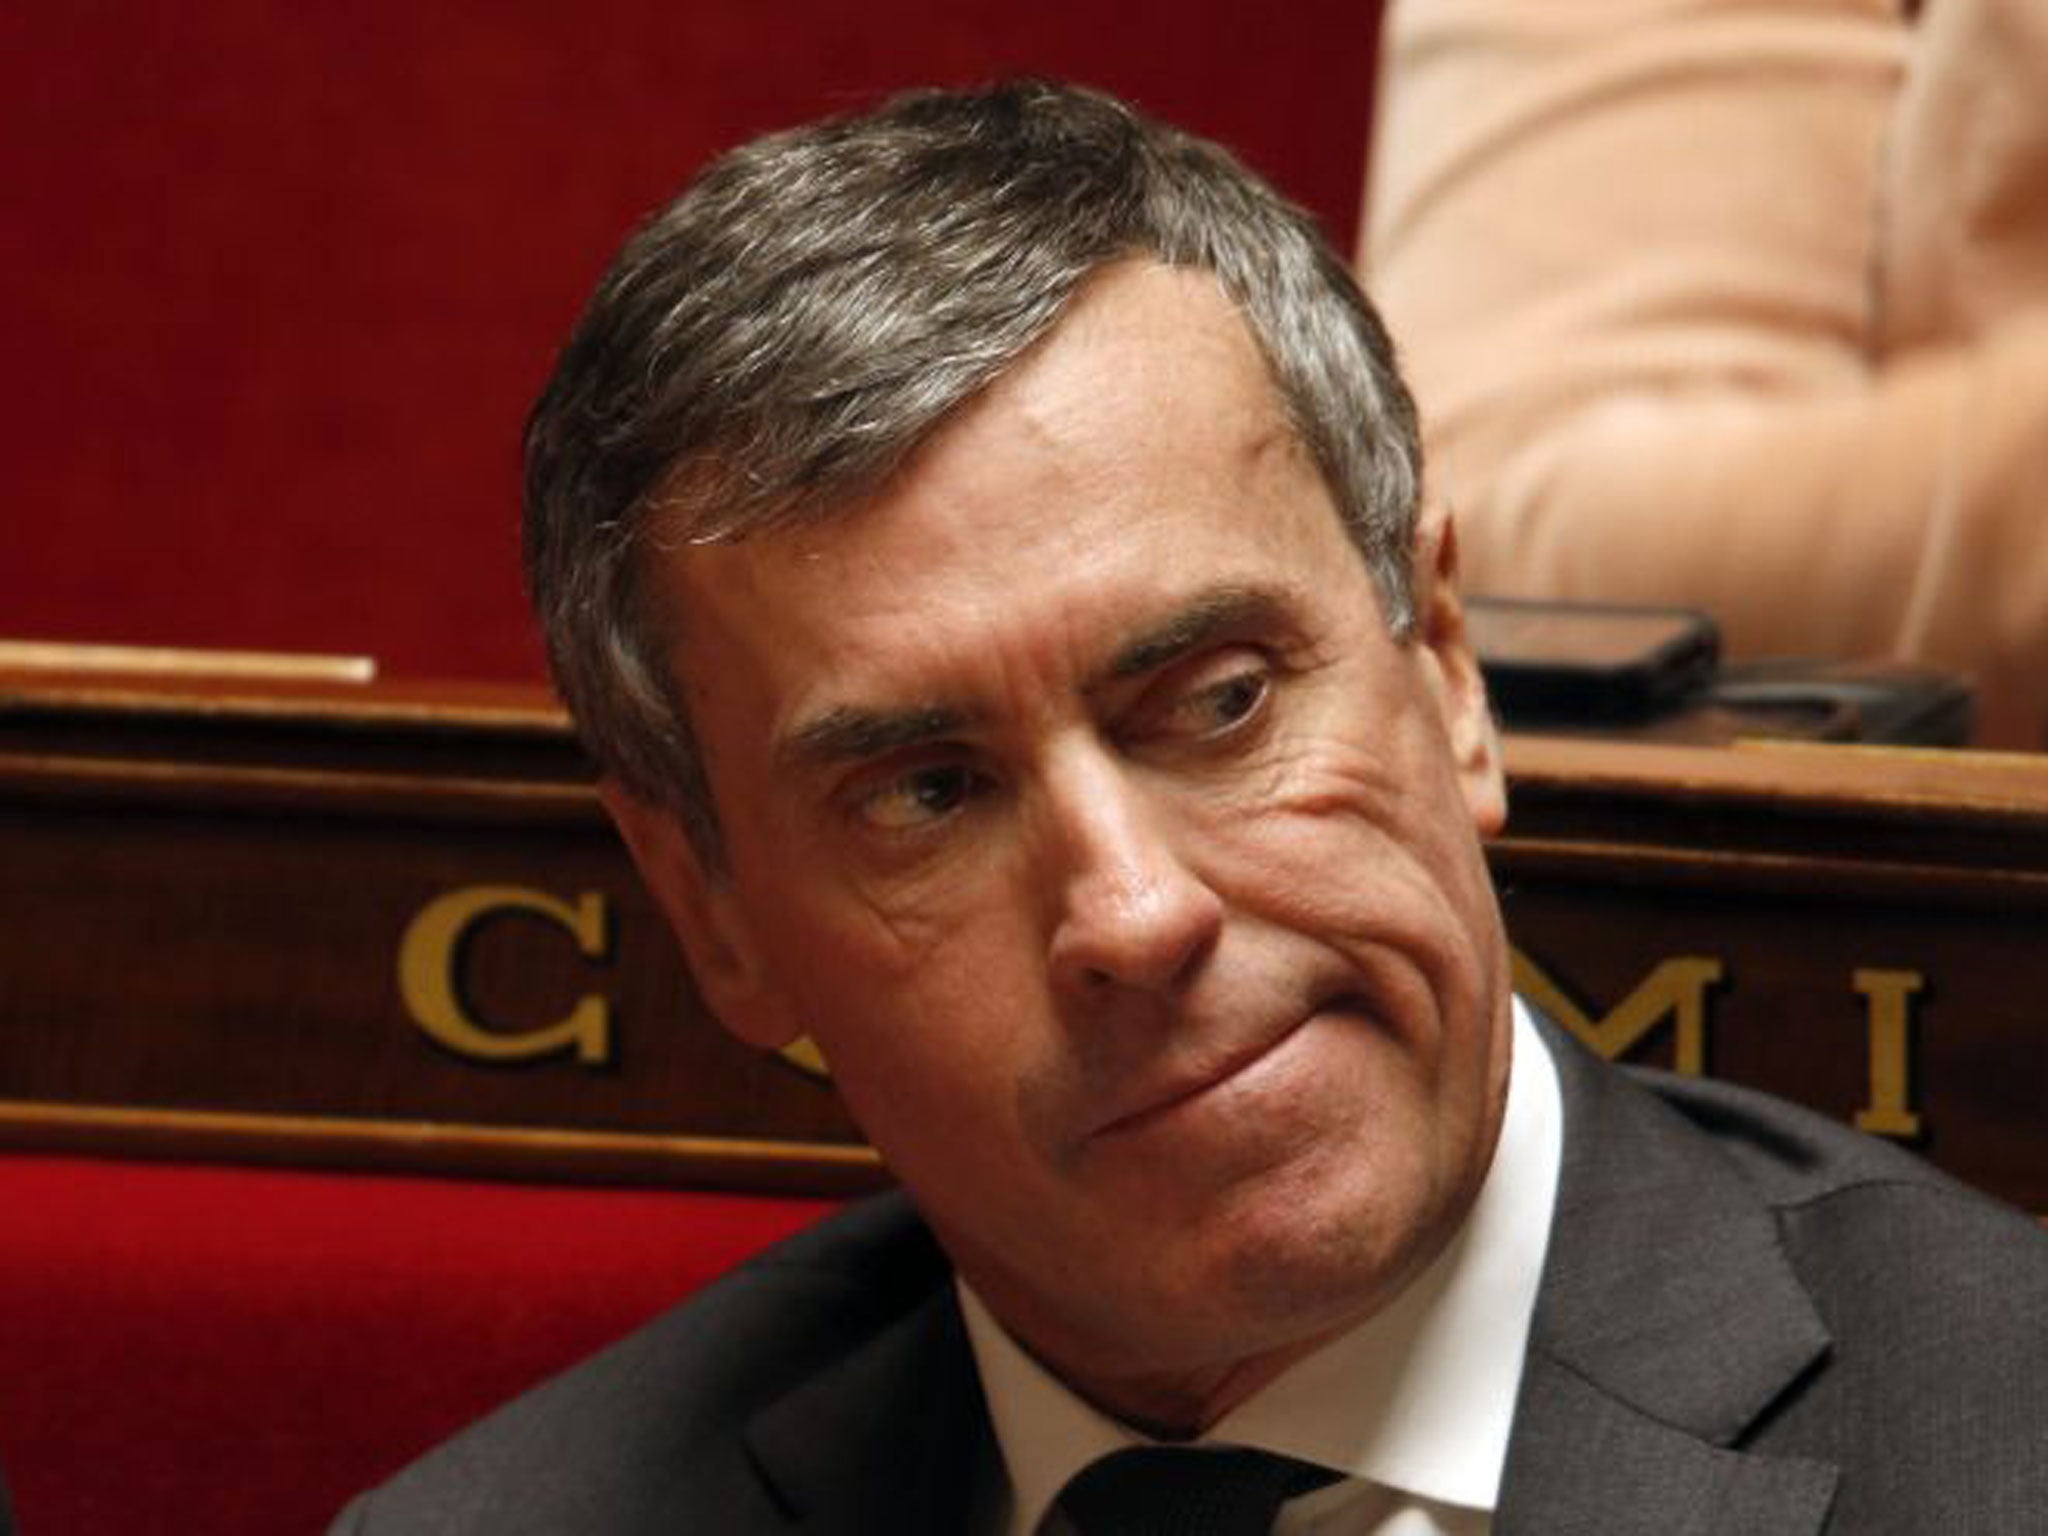 Jérôme Cahuzac has not yet been formally accused of a crime